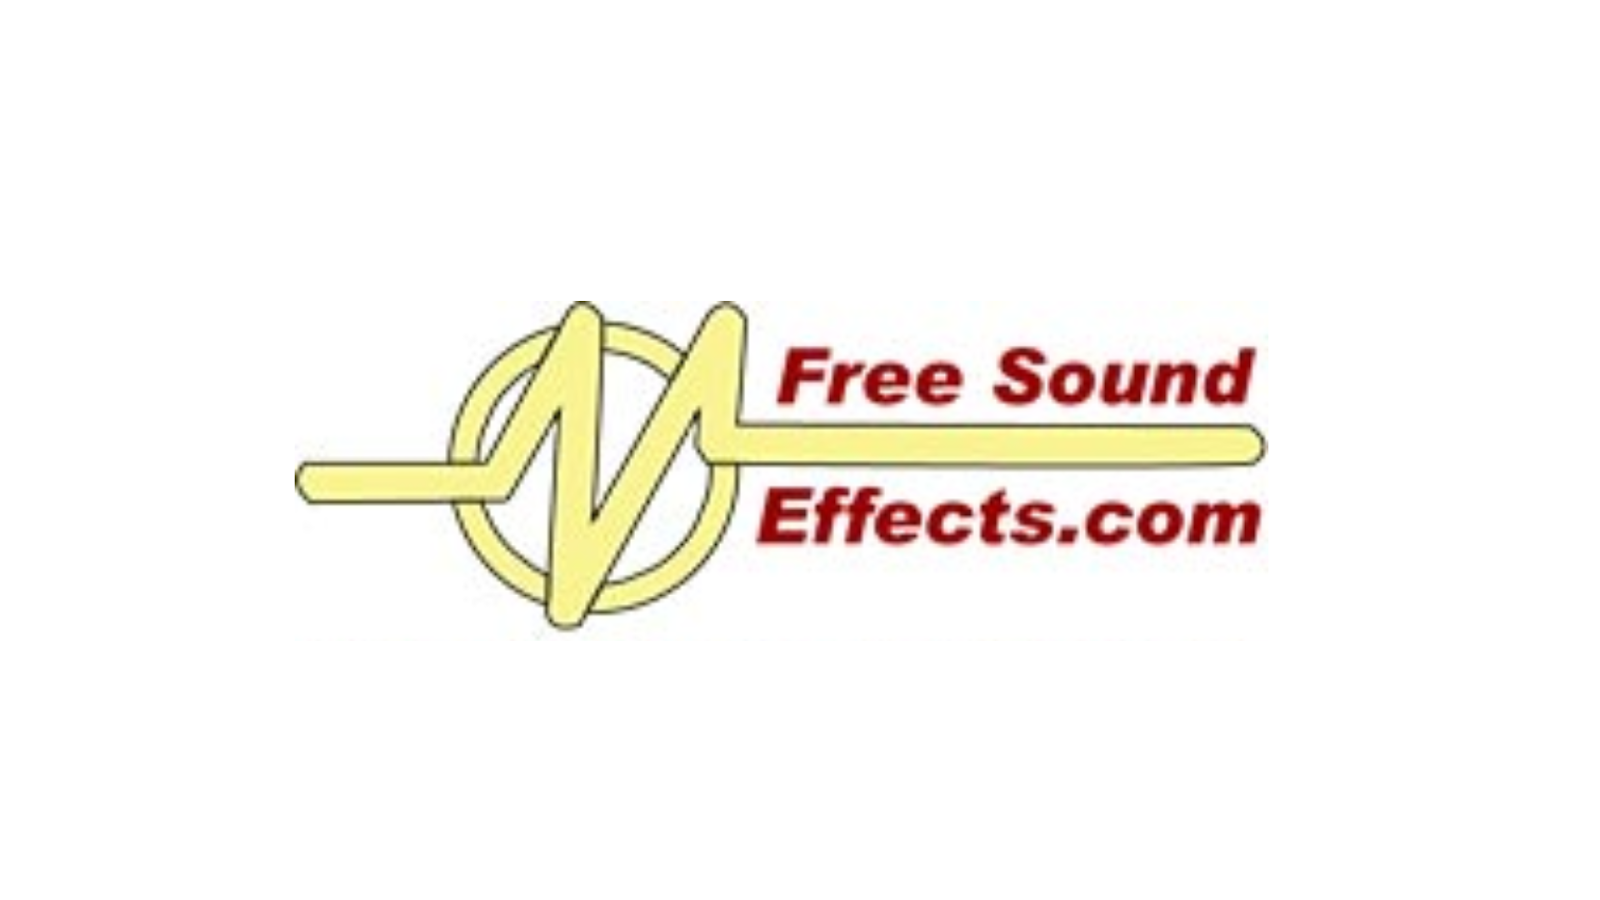 freesoundeffects website brand logo